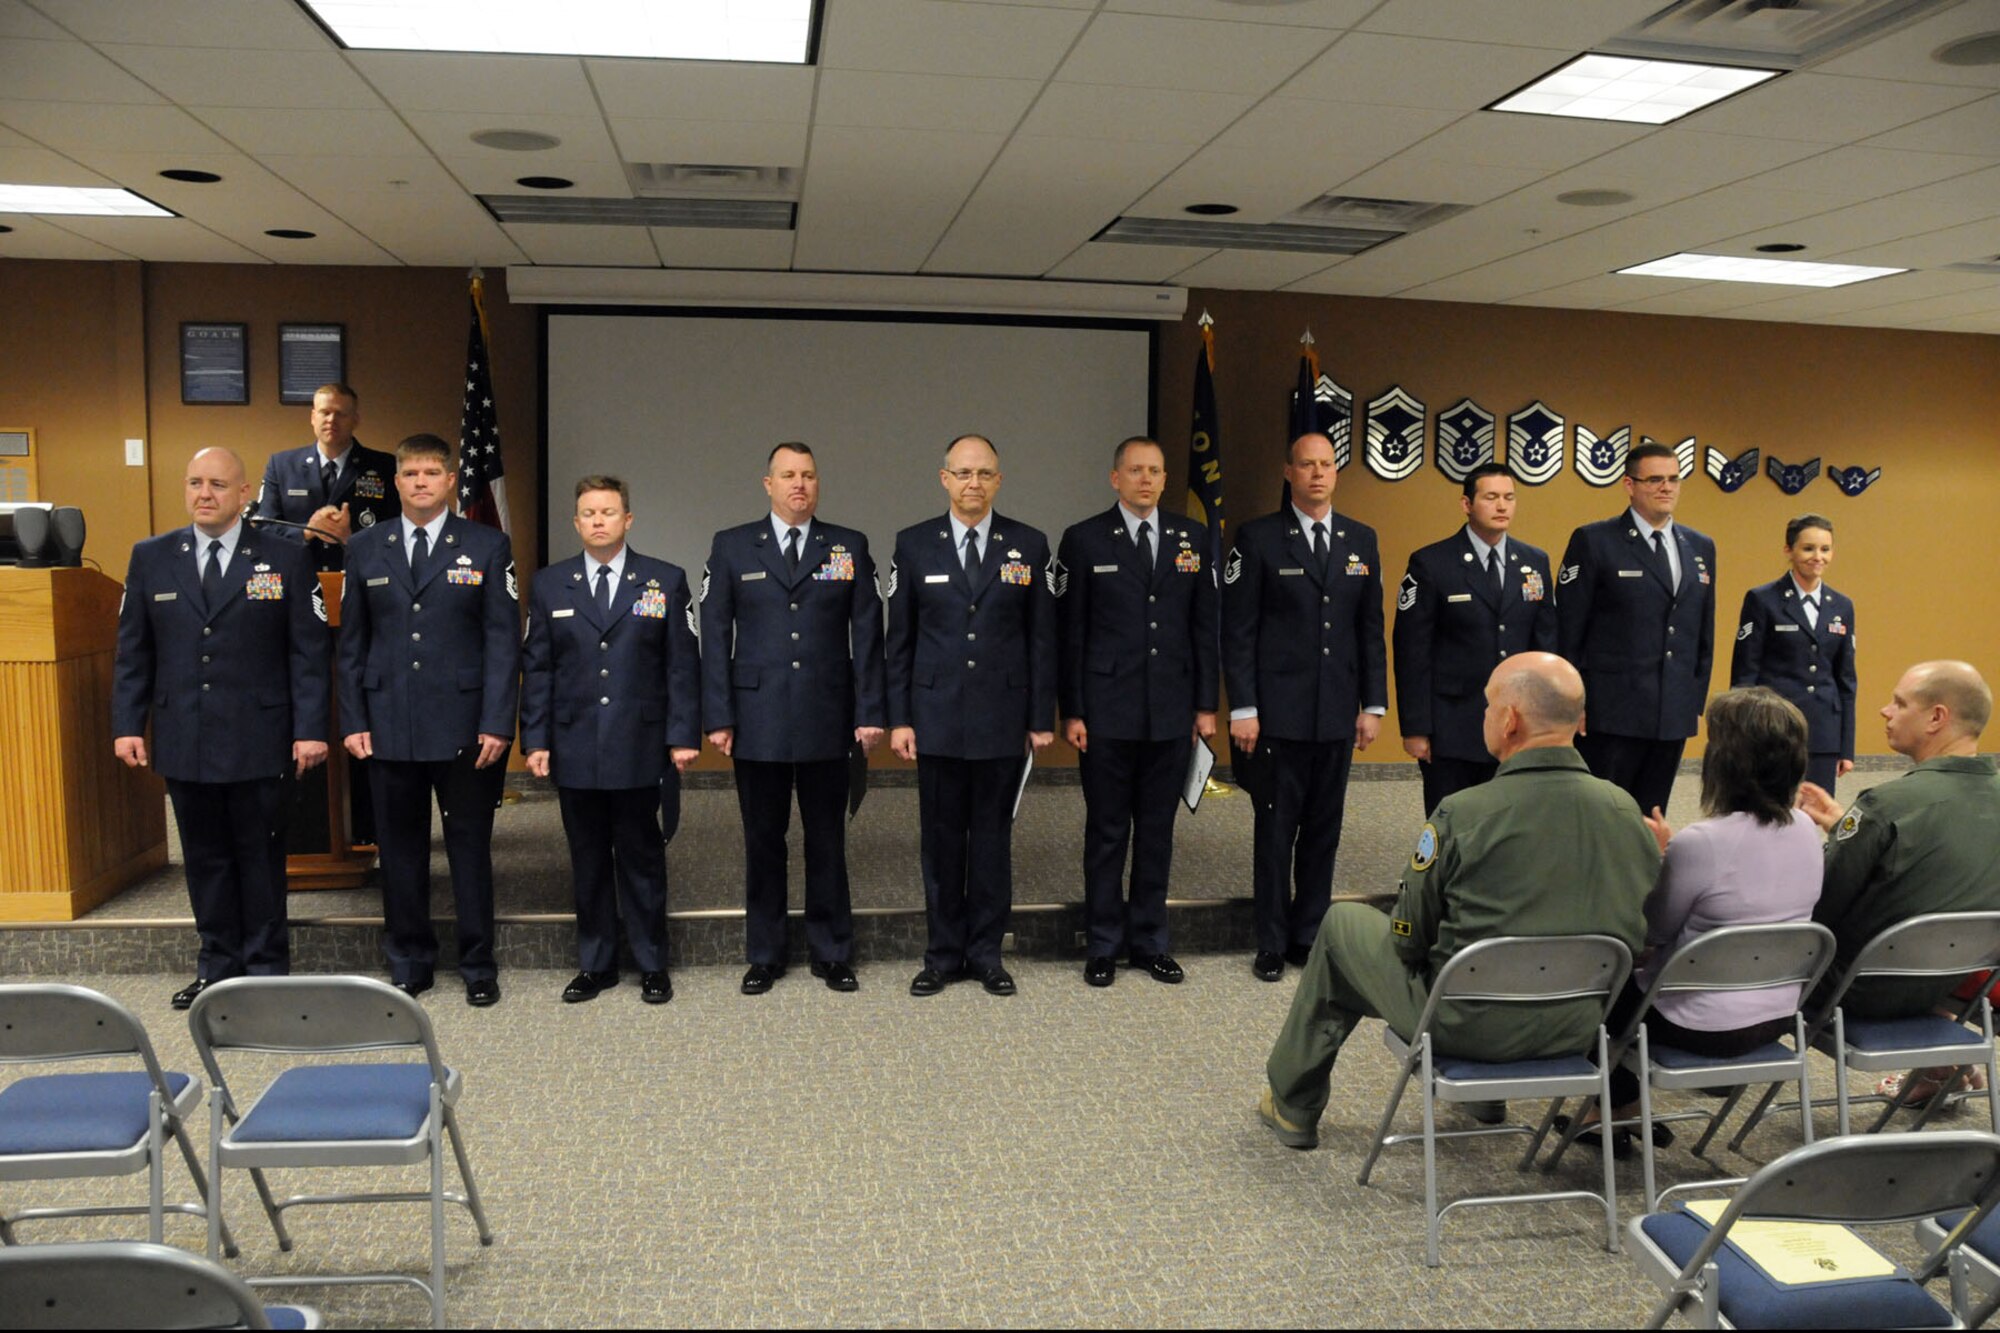 Newly inducted NCOs and senior NCOs are introduced to Wing leadership, unit members and guests during the NCO and senior NCO Induction Ceremony held at the 120th Fighter Wing on April 7. (U.S. Air Force Photo/Senior Master Sgt. Eric Peterson)